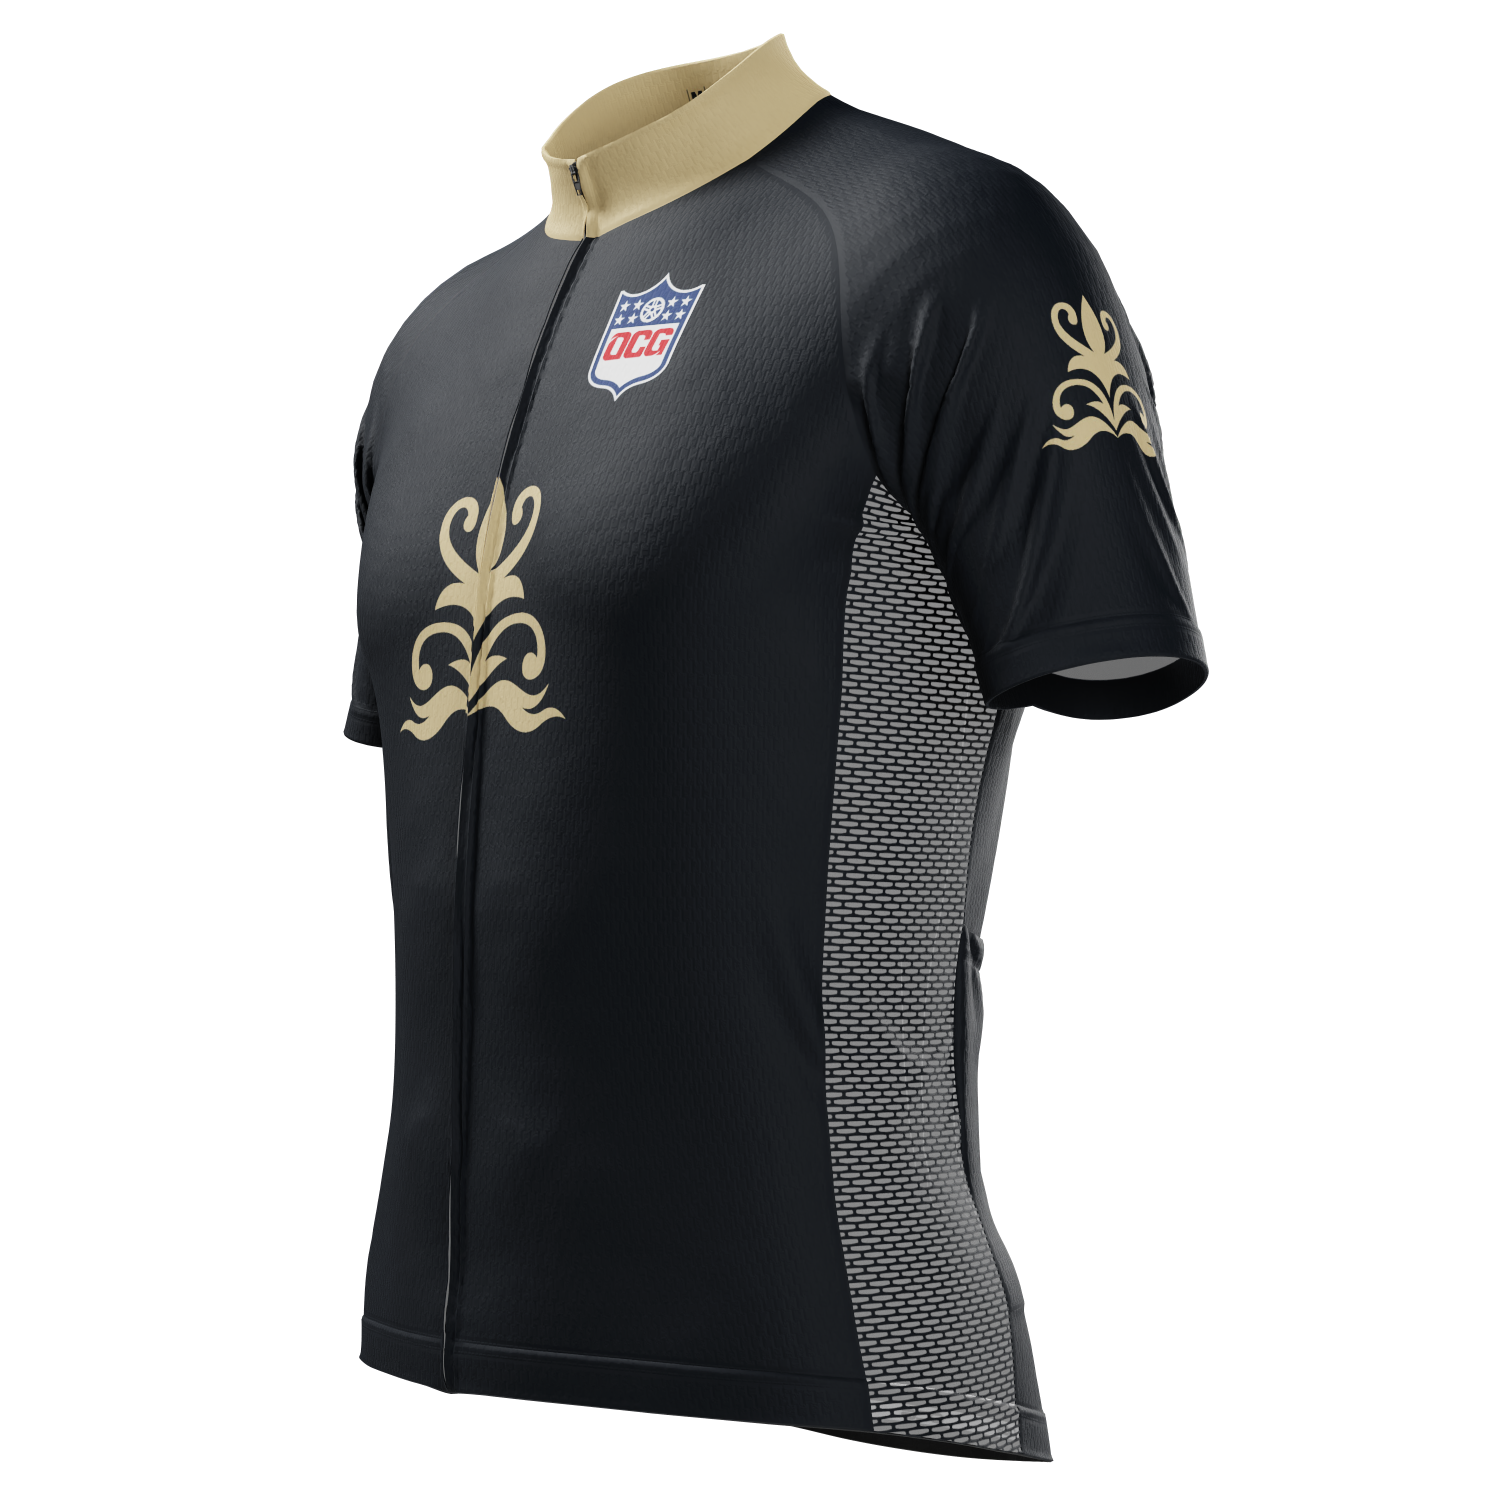 Men's New Orleans Football Short Sleeve Cycling Jersey